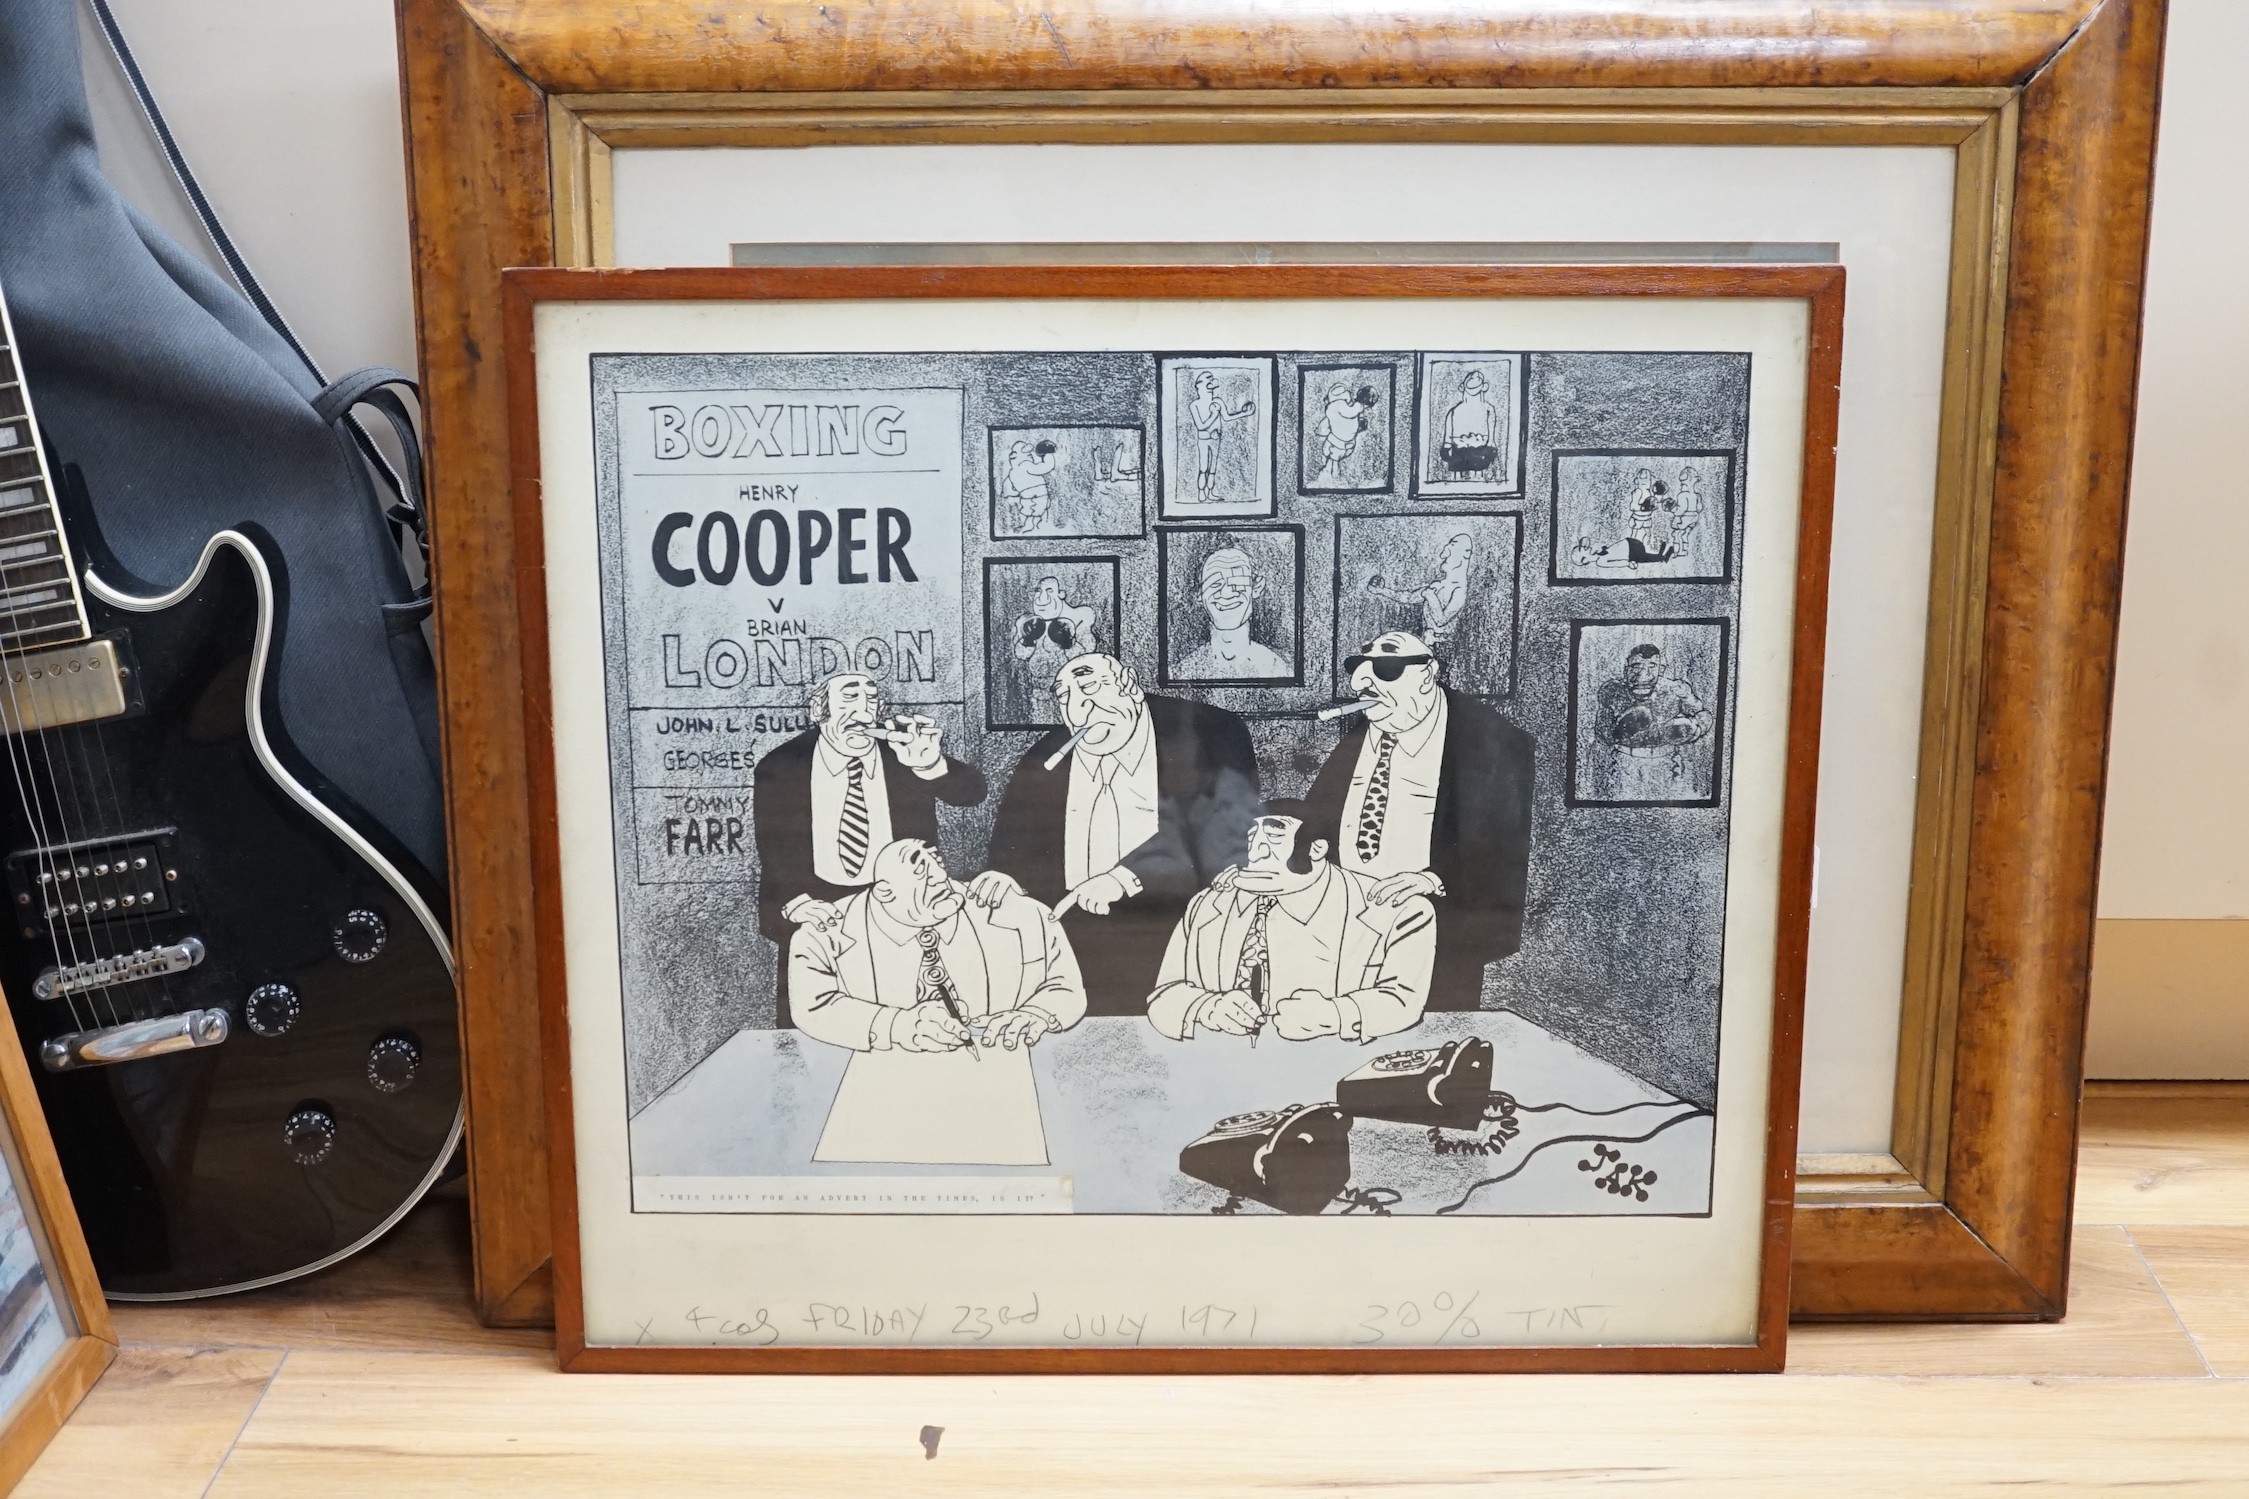 Raymond Allen Jackson 'Jak' (1927-1997), ink and watercolour, original cartoon relating to Henry Cooper vs Brian London boxing match 'This isn't for an advert in The Times is it?', Friday 23rd July 1971, signed, overall